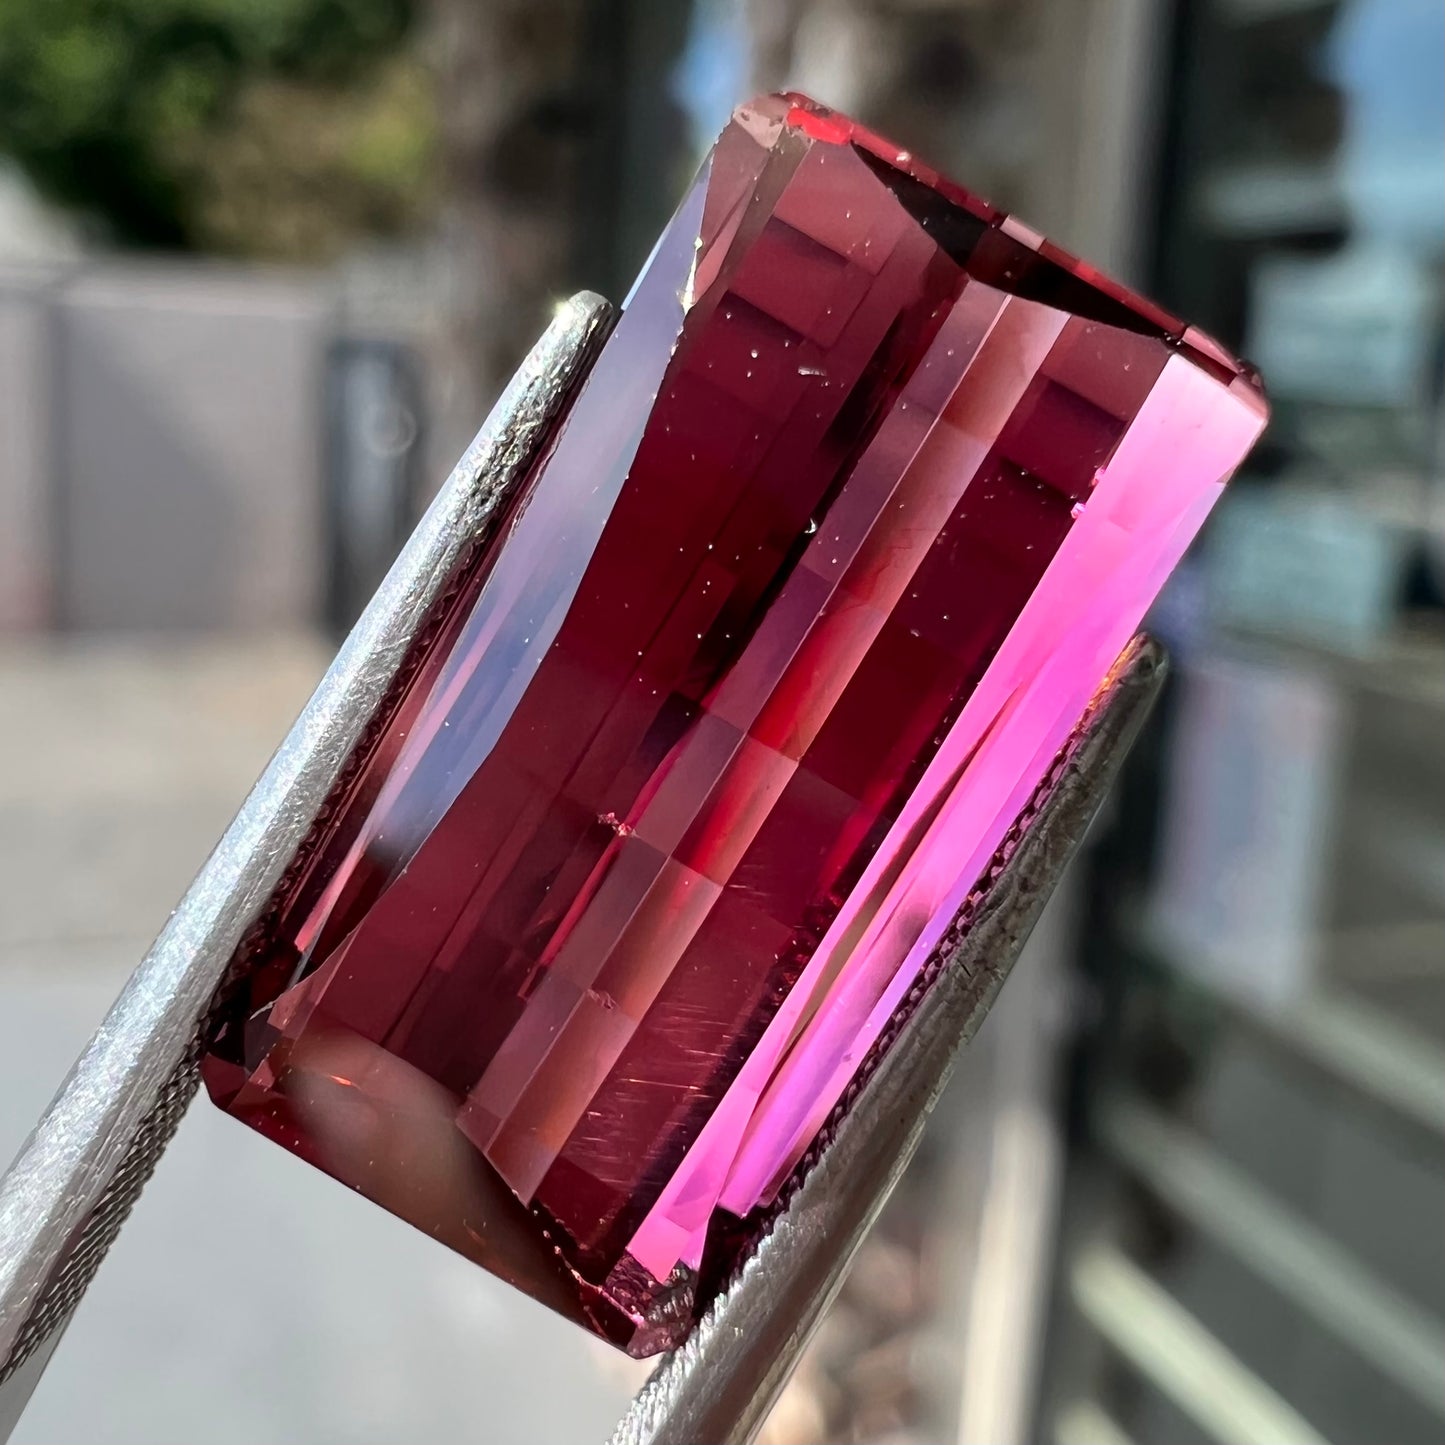 A loose, fantasy cut reddish colored tourmaline.  The cut reflects light in a way that resembles digital pixels on a screen.